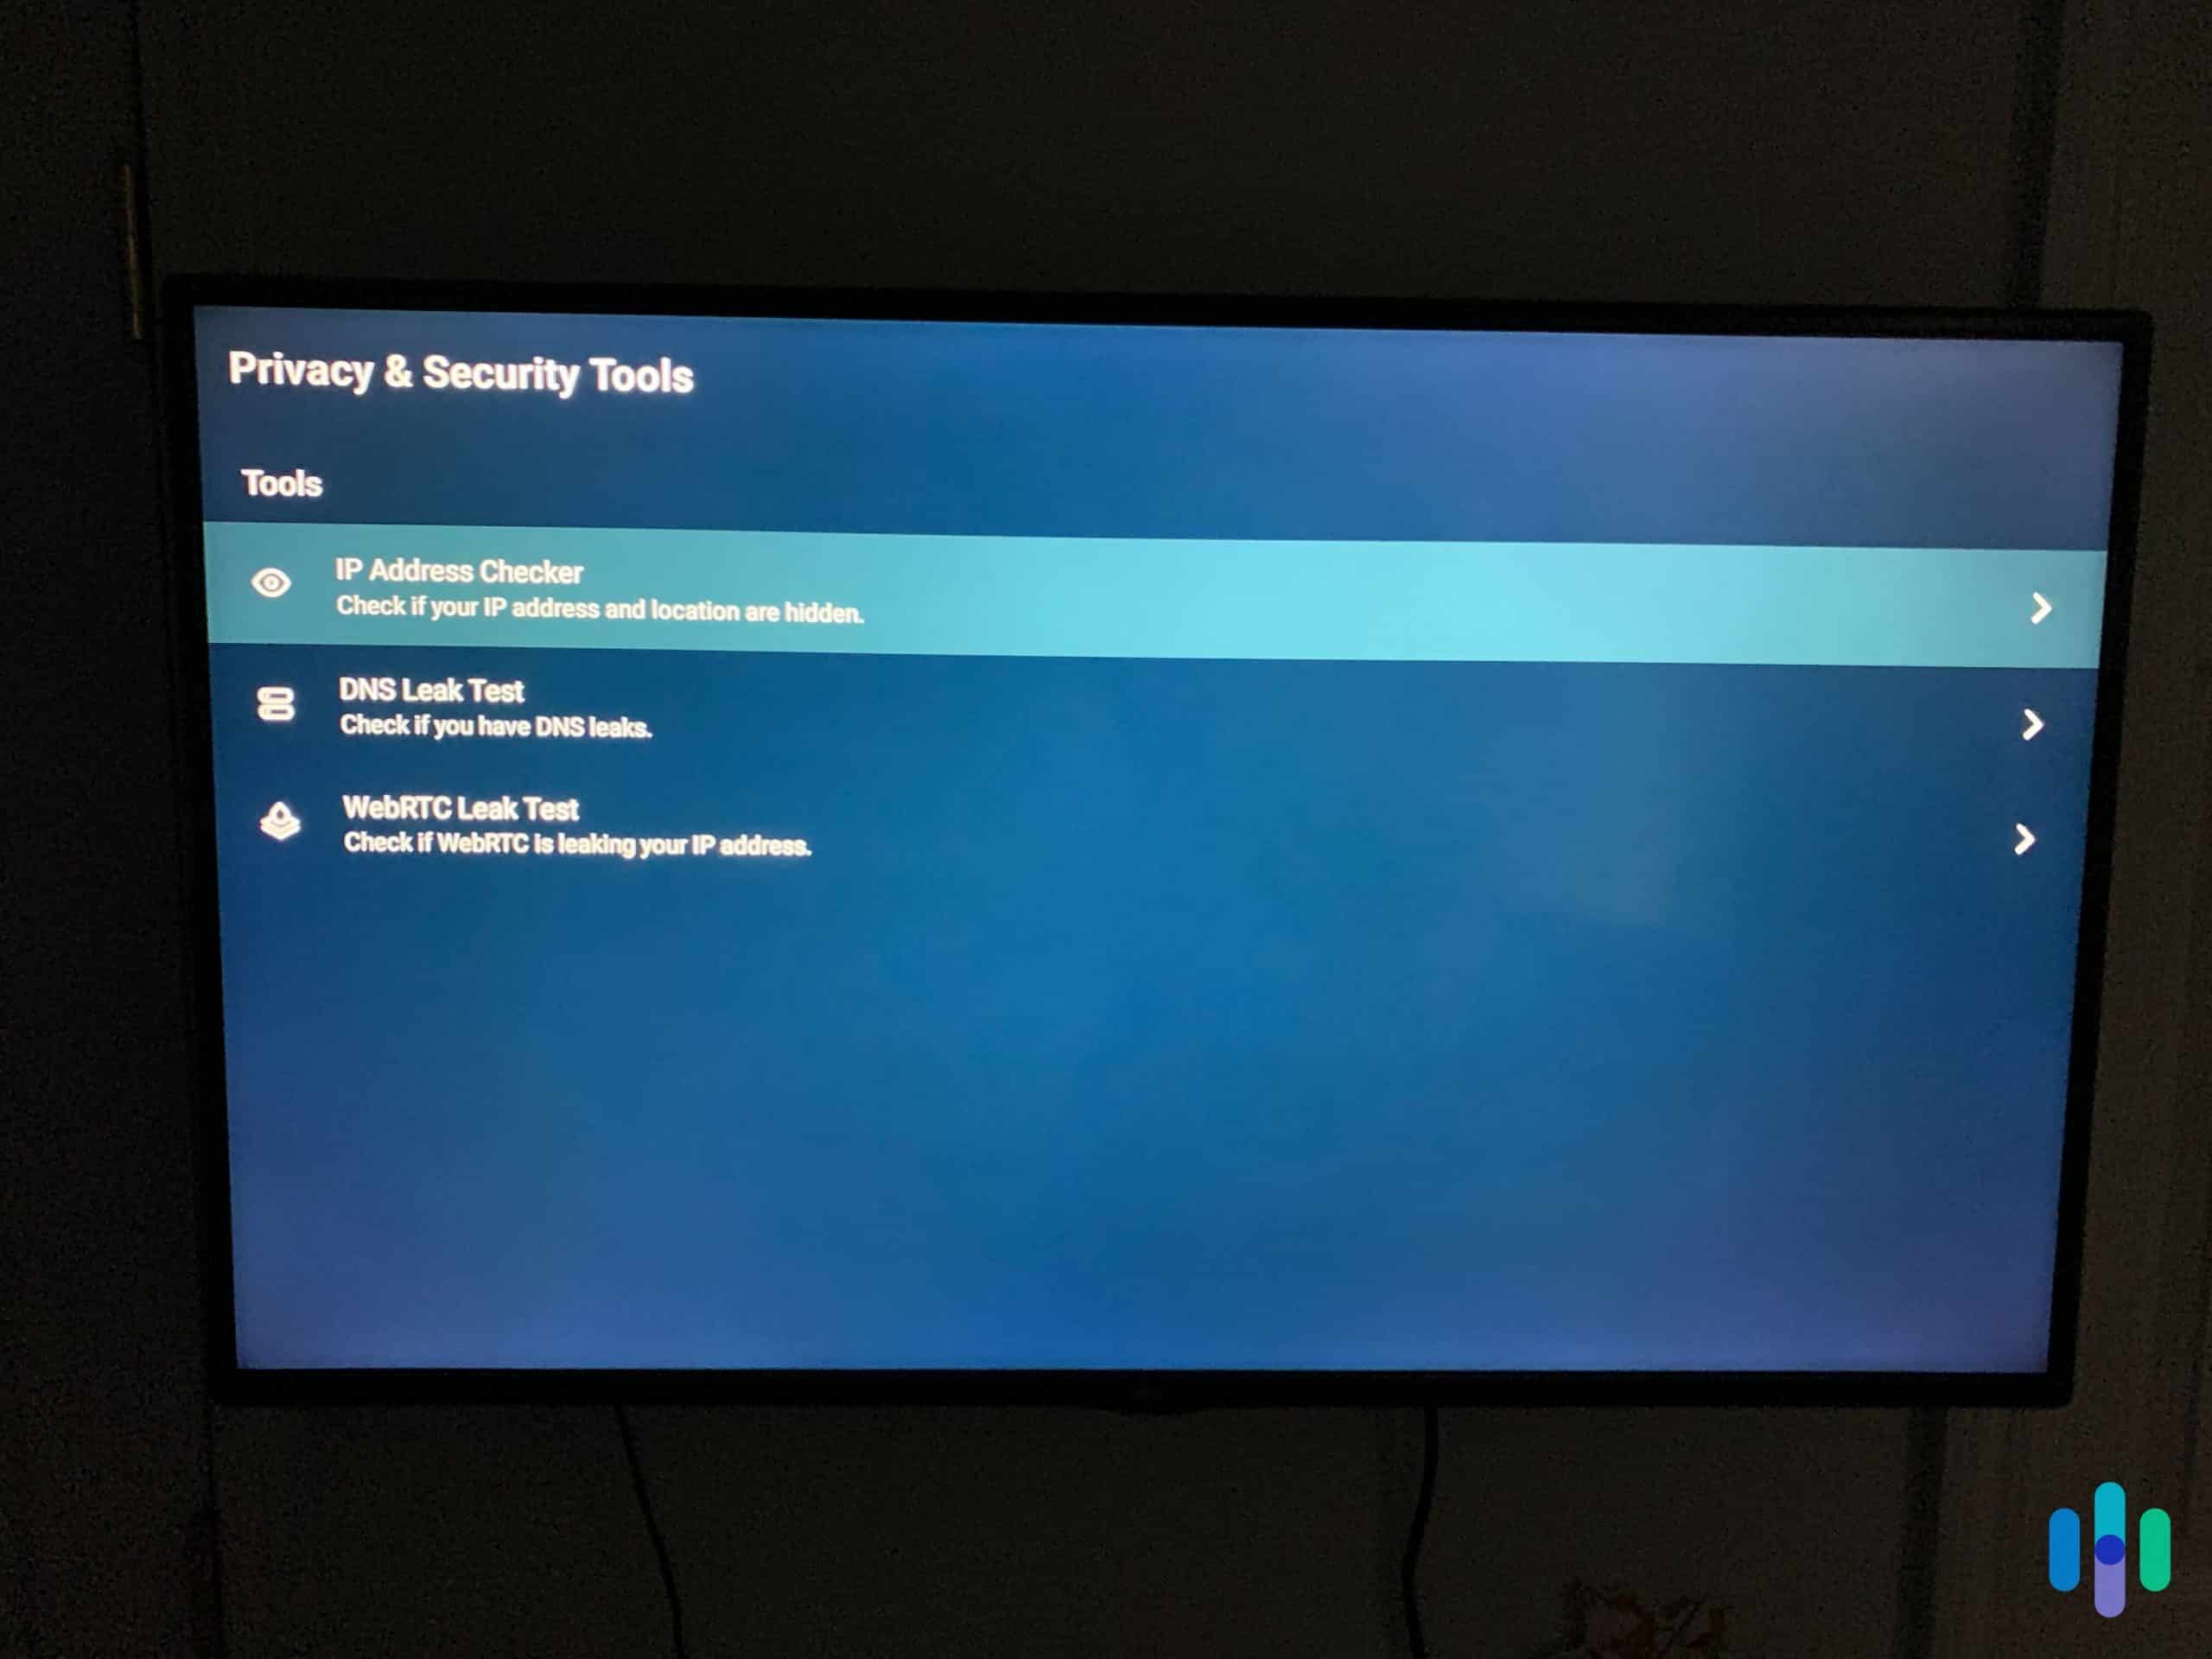 ExpressVPN's Privacy & Security Tools on the Amazon Fire TV Stick